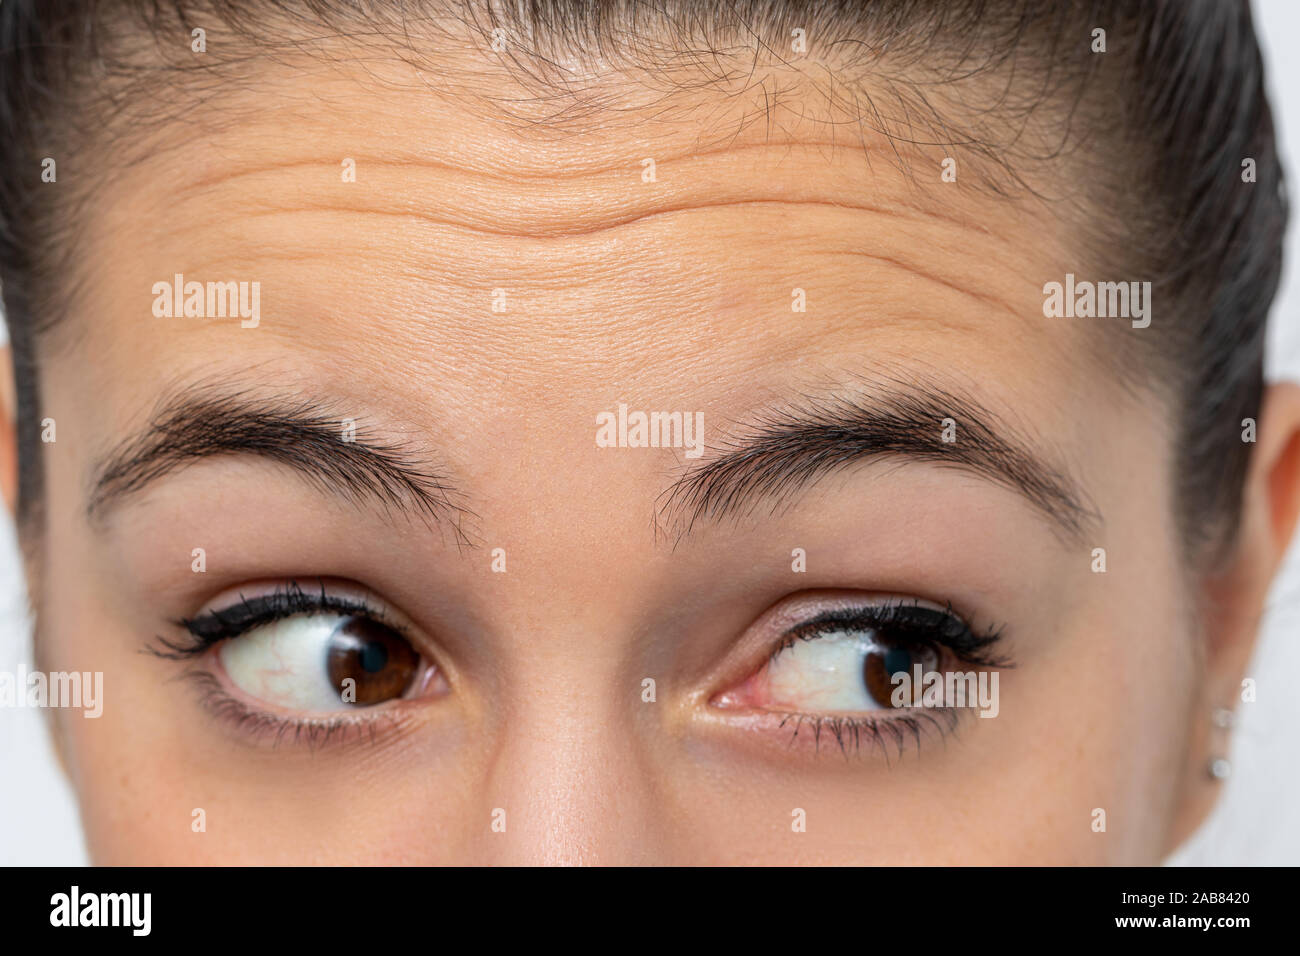 Close up detail of woman looking aside frowning forehead. Prominent wrinkles shown on skin. Stock Photo